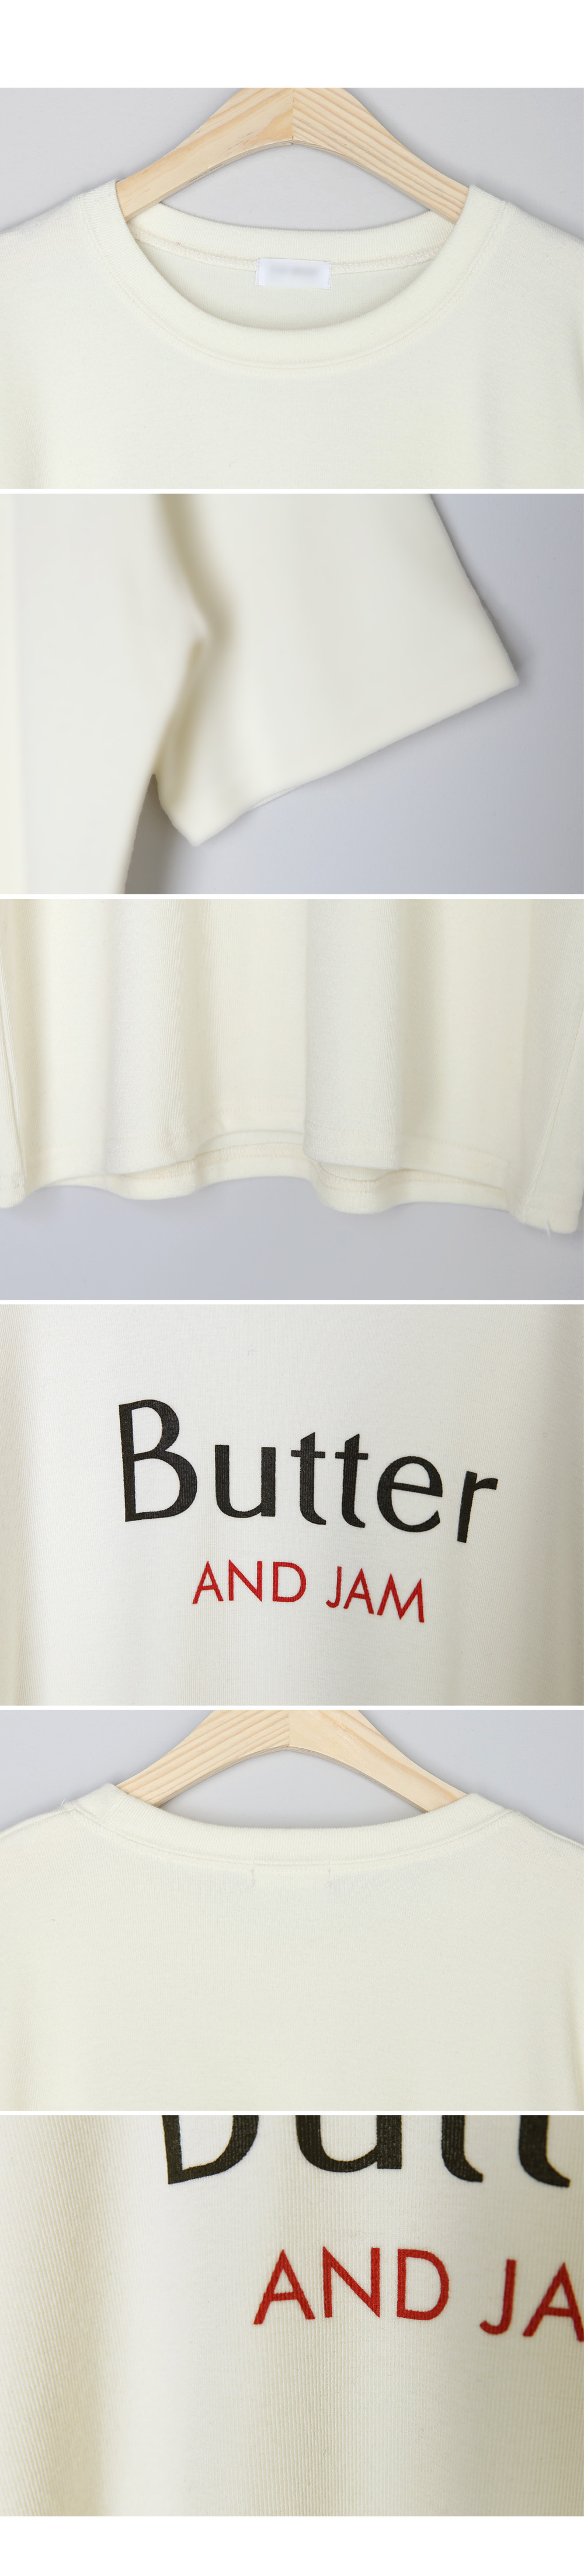 Butter AND JAMルーズTシャツ・全2色 | DHOLIC | 詳細画像21